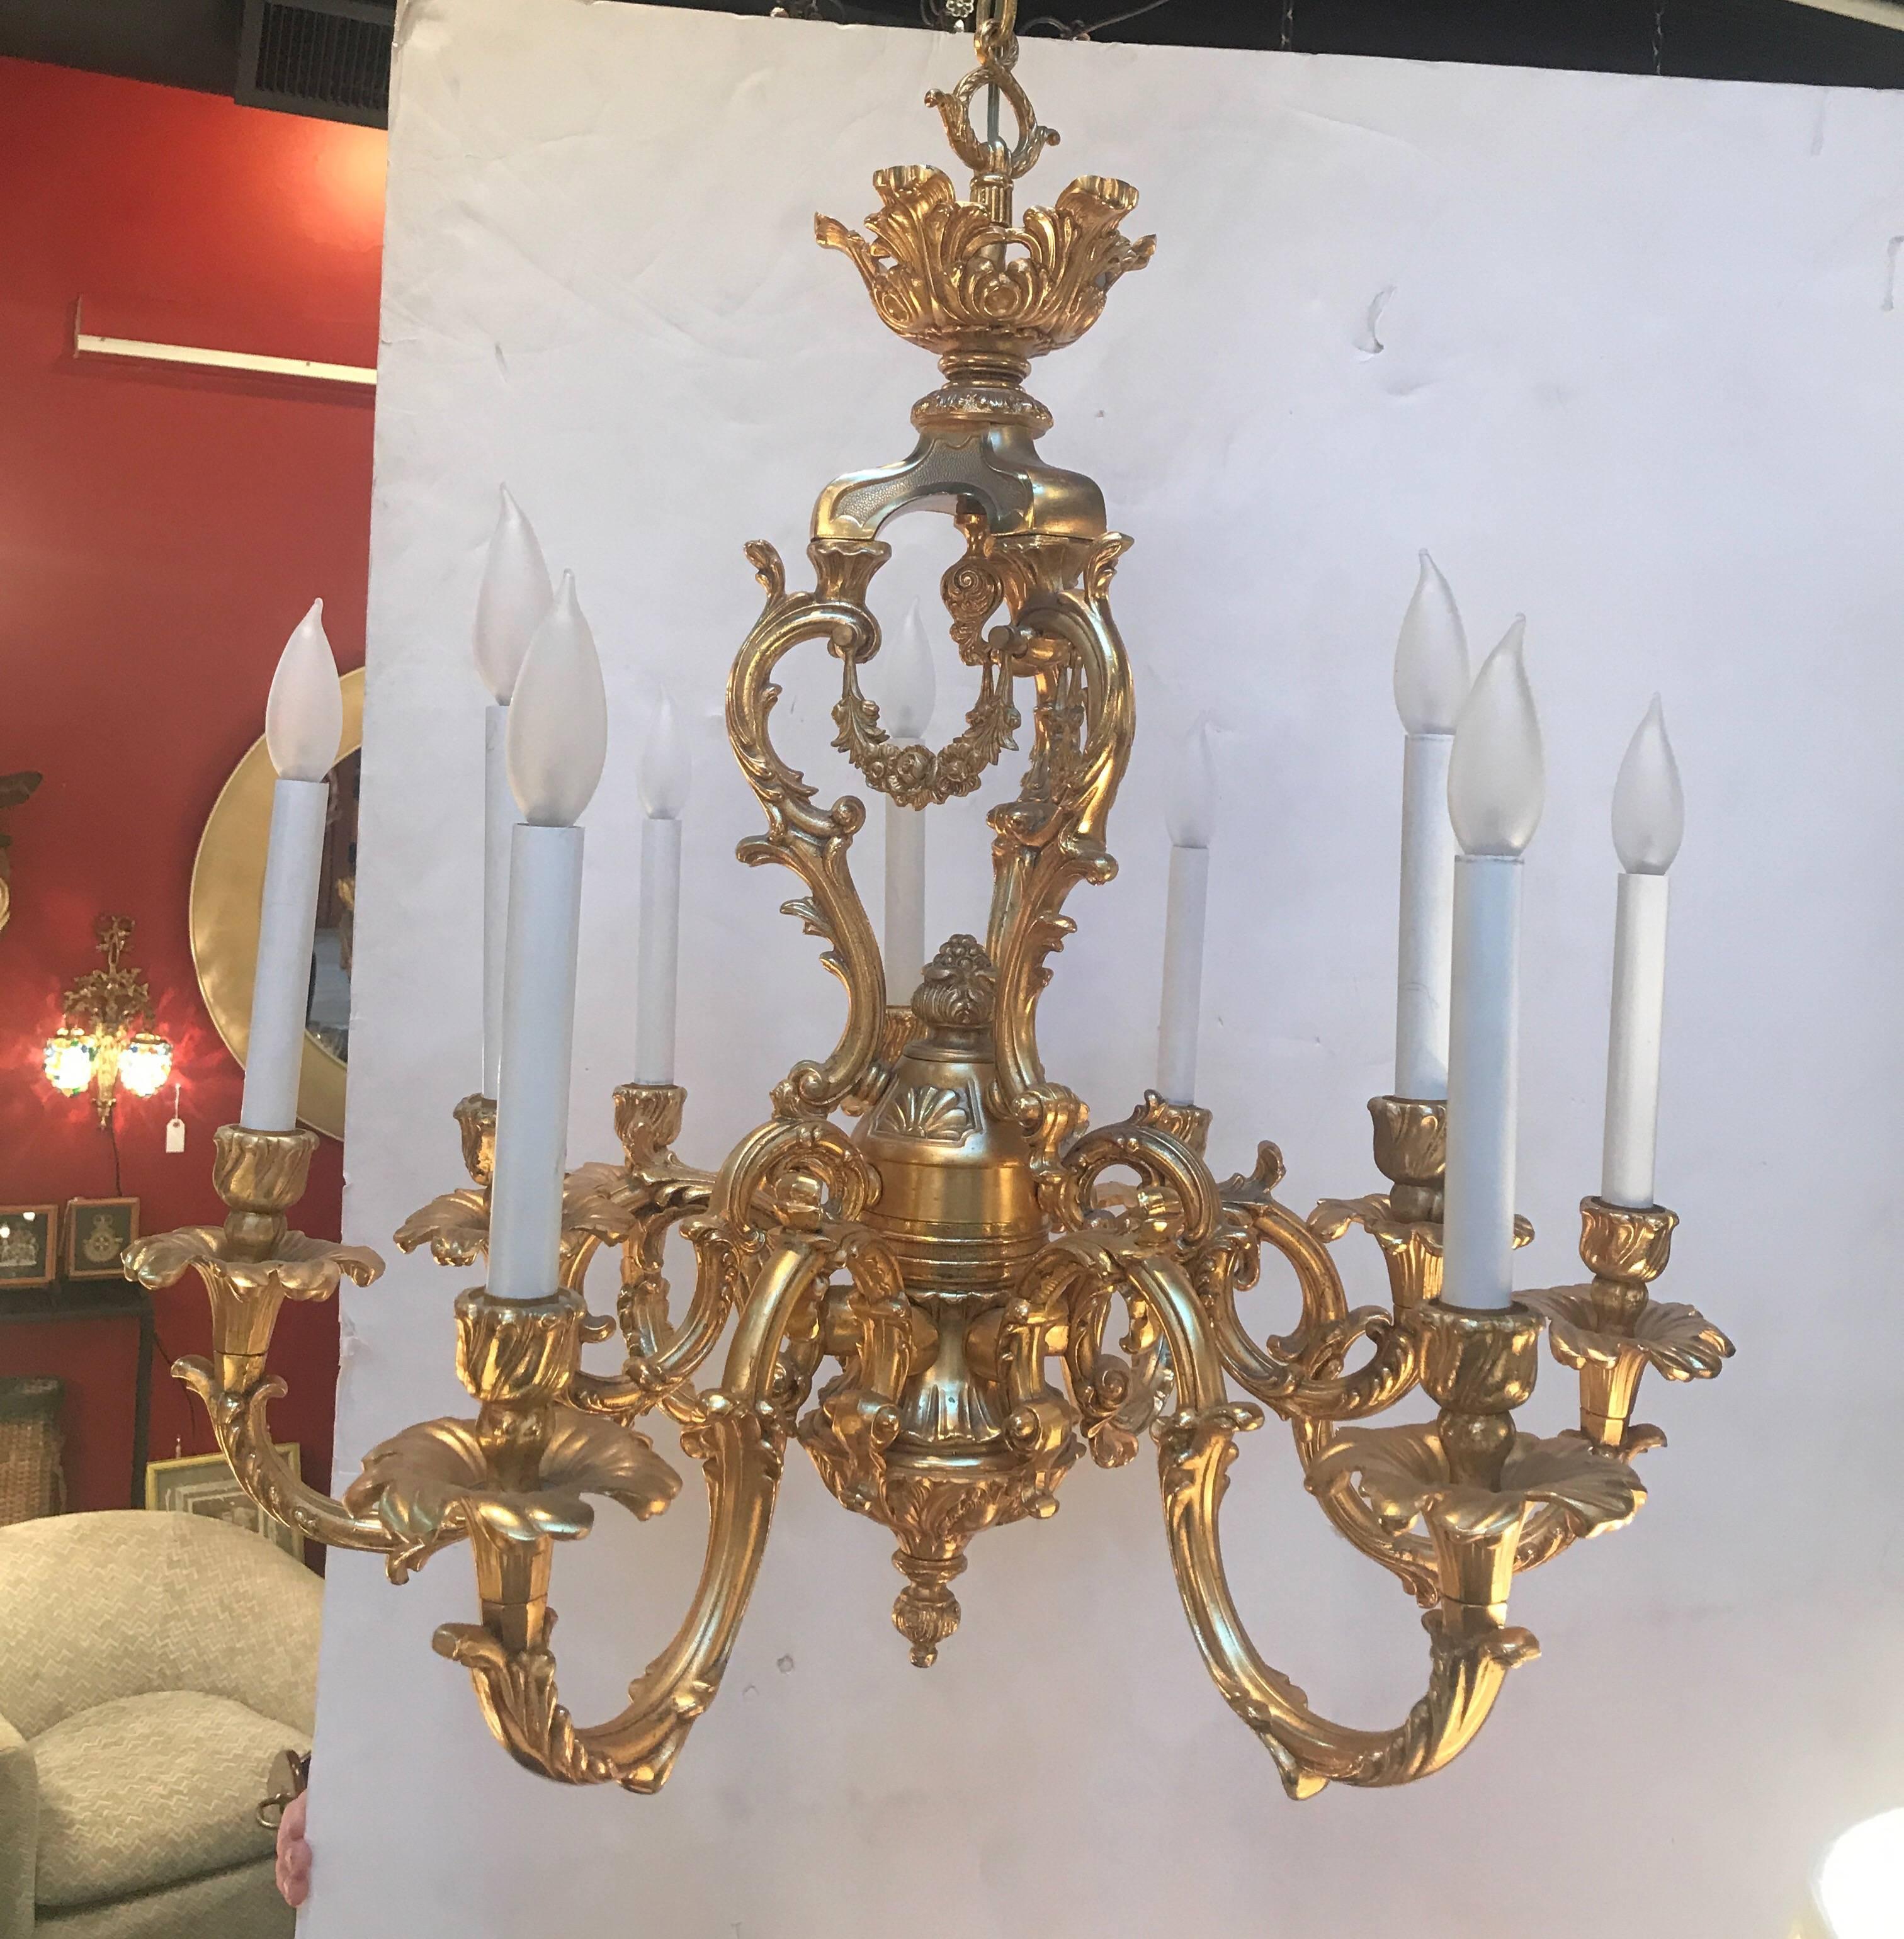 Stunning gilt cast bronze rococo Italian chandelier.  Elaborate style with a total of 9 lights.  Modern wiring and ready to hang.  